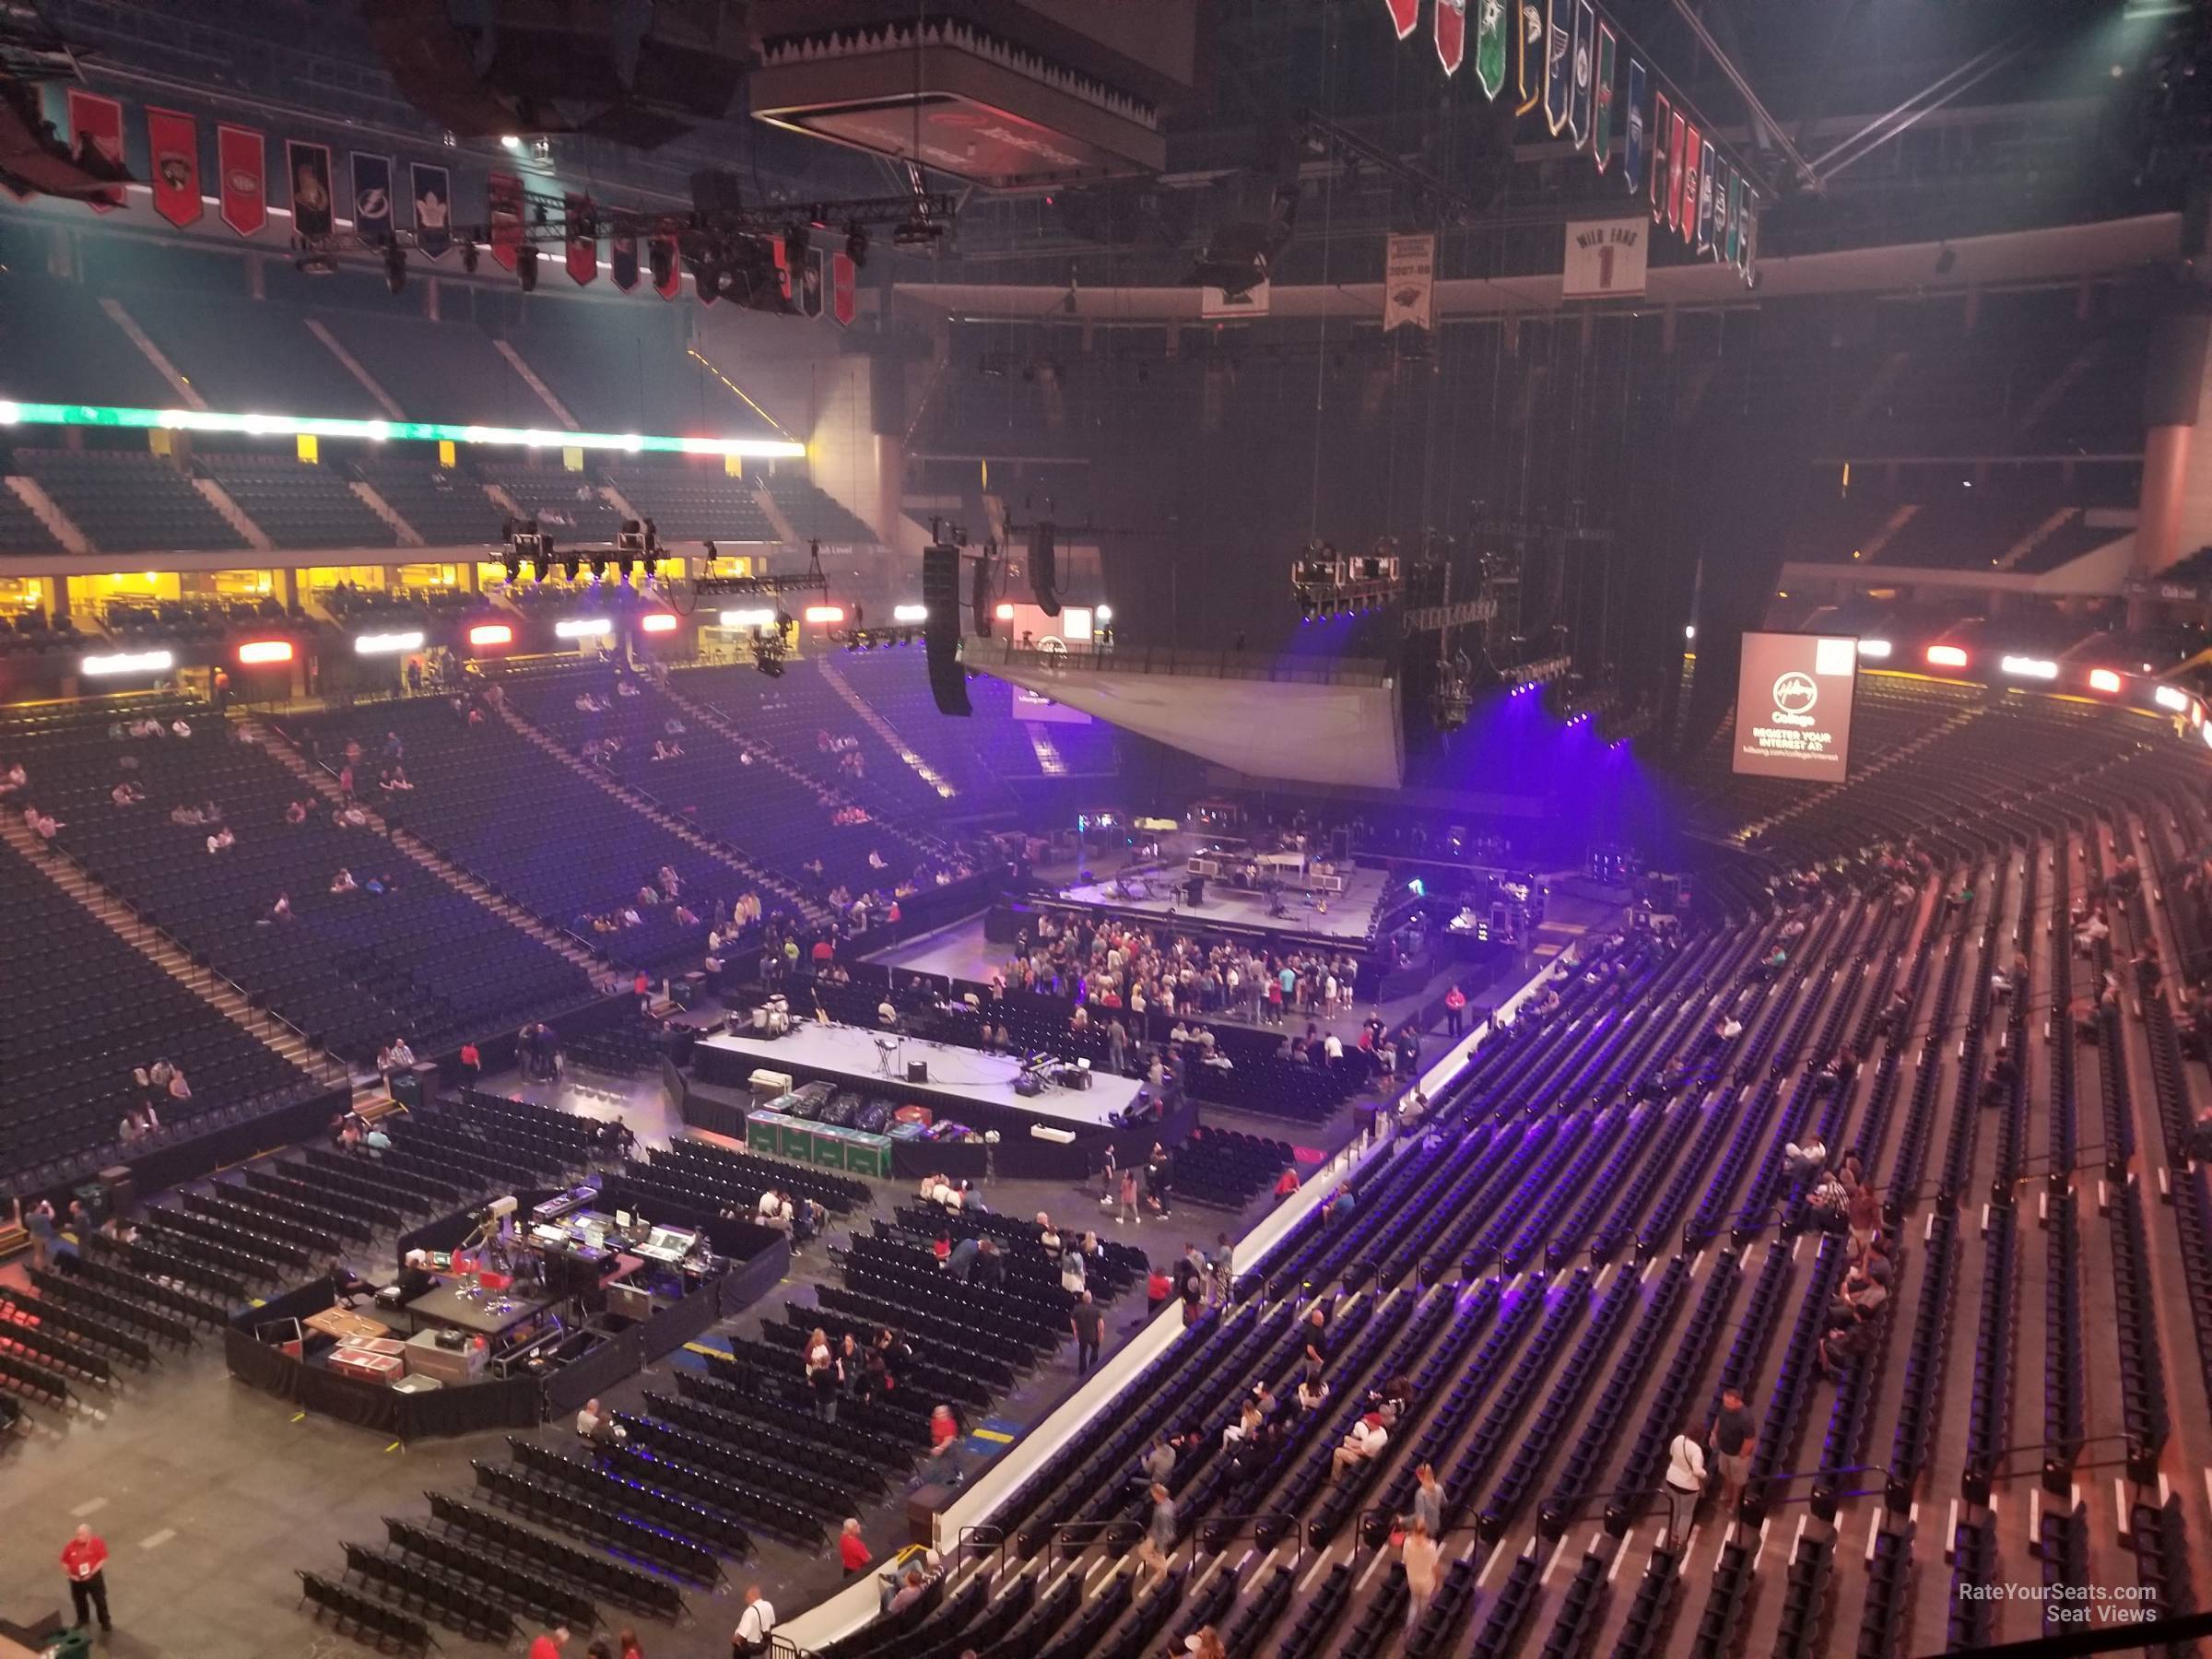 Section C12 at Xcel Energy Center for Concerts